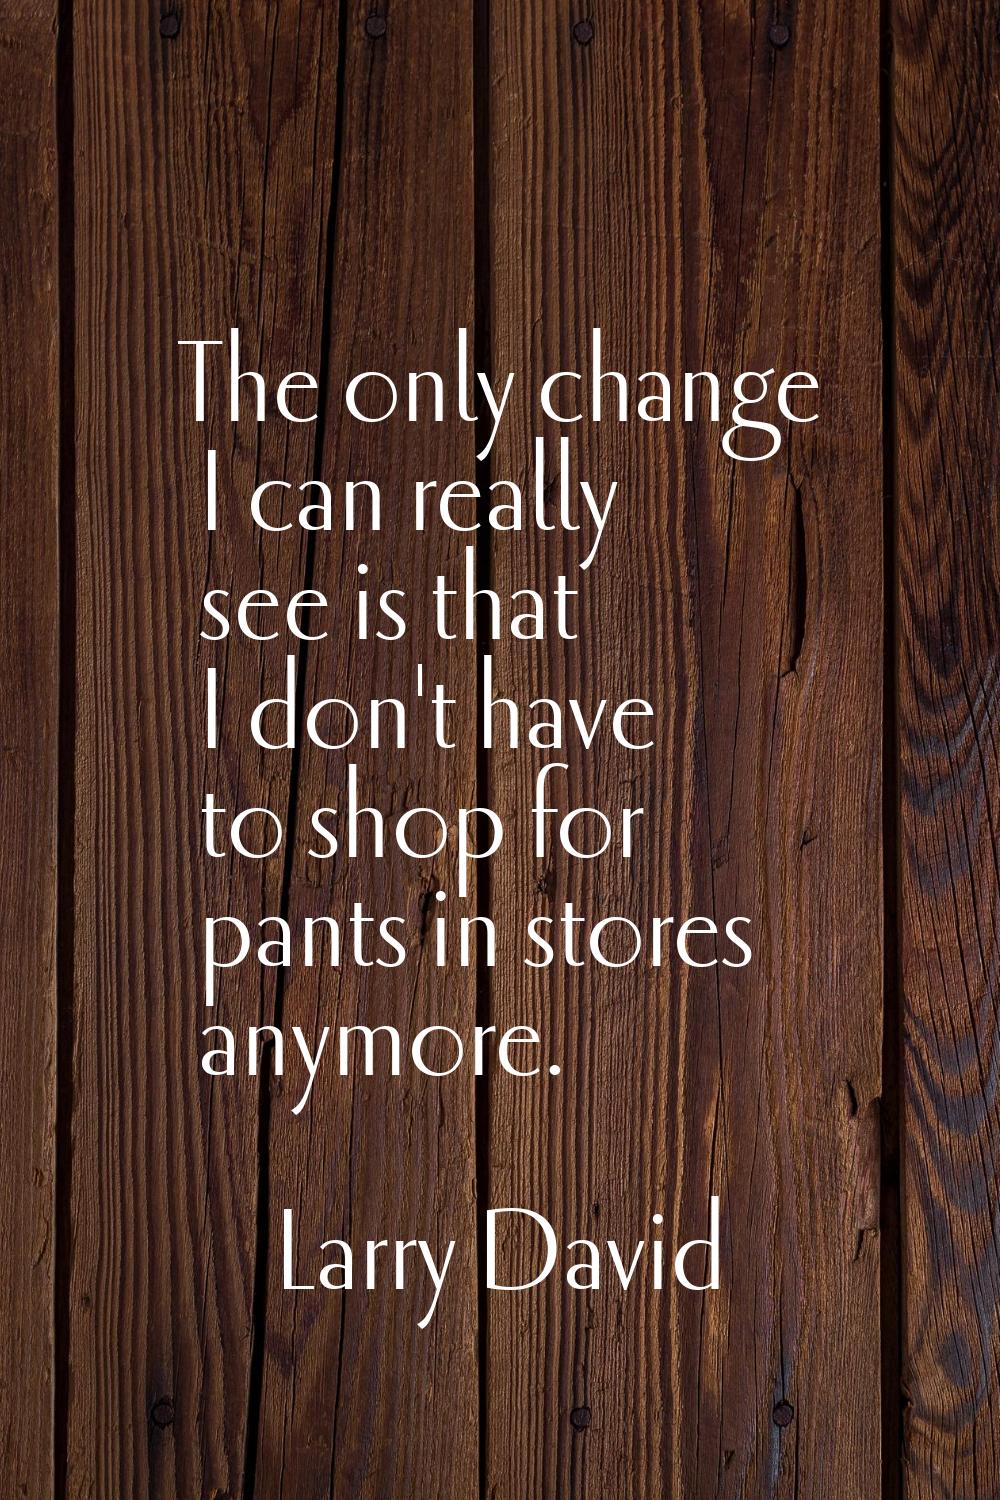 The only change I can really see is that I don't have to shop for pants in stores anymore.